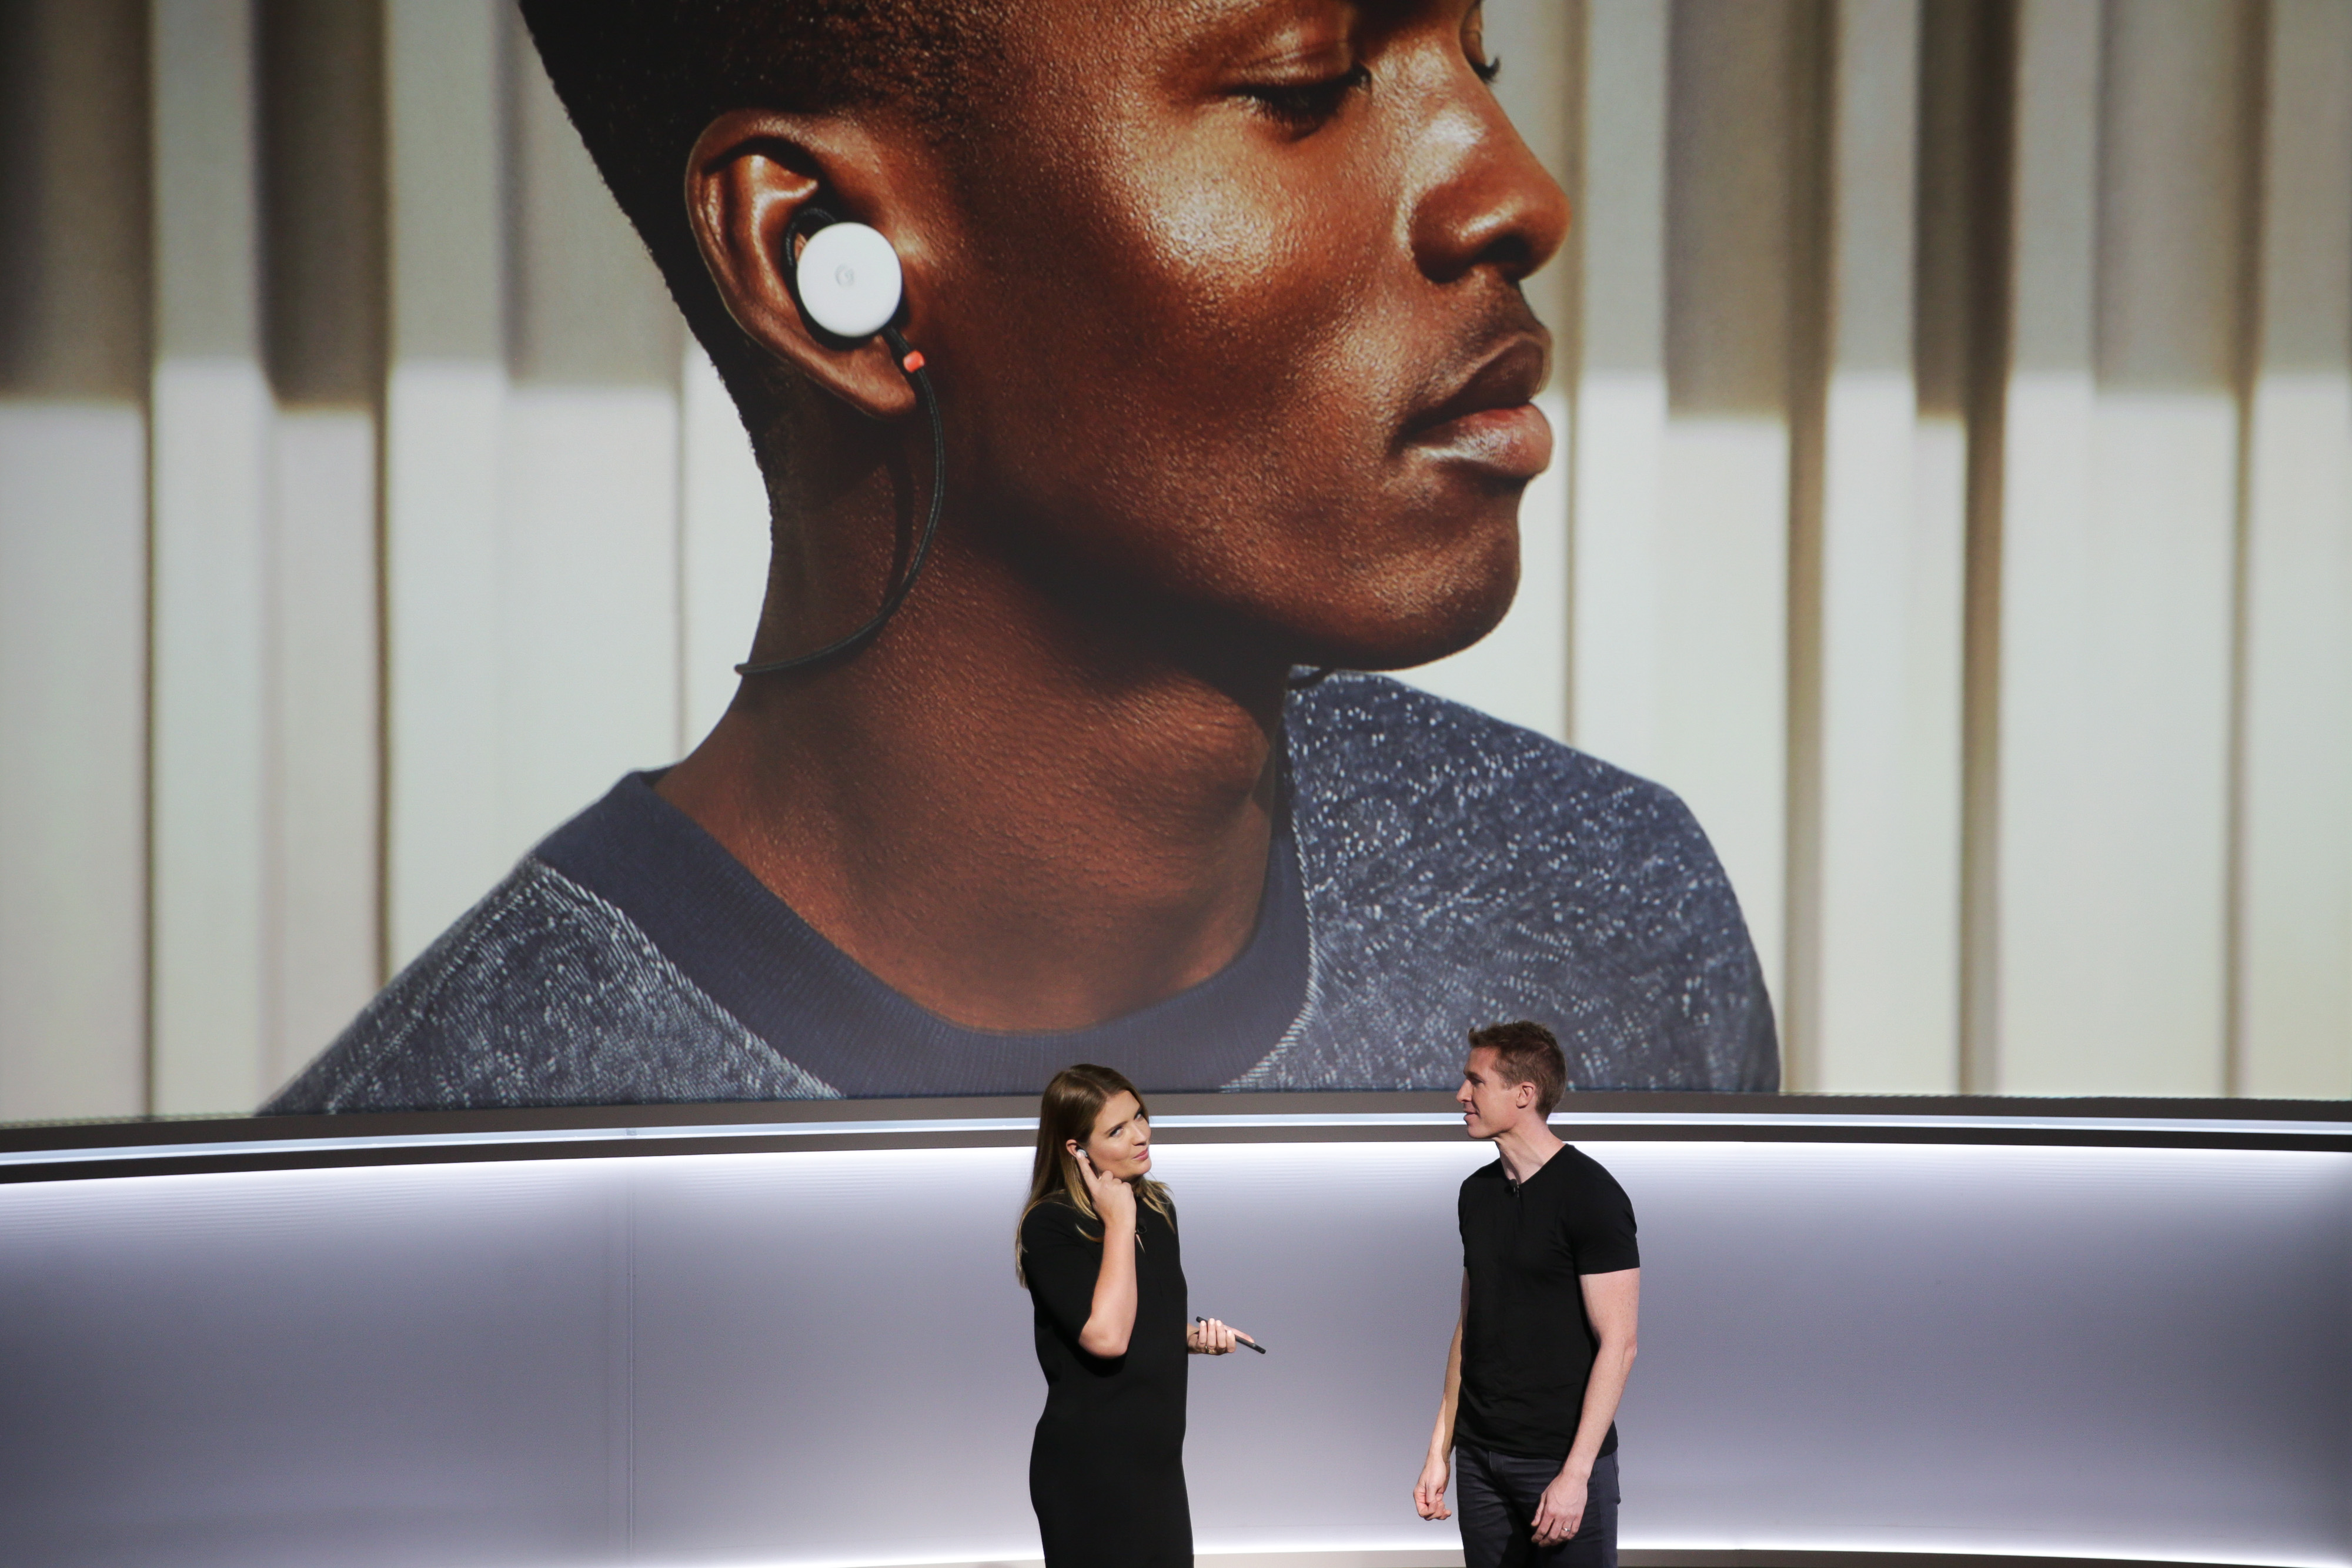 Isabelle Olsson, lead designer for home hardware for Google, and Juston Payne, Product Manager for Google Clips, demonstrate two-way translation using Google Pixel Buds and the Google Pixel 2 smartphone at a product launch event on October 4, 2017 at the SFJAZZ Center in San Francisco, California. (Photo: ELIJAH NOUVELAGE/AFP/Getty Images)